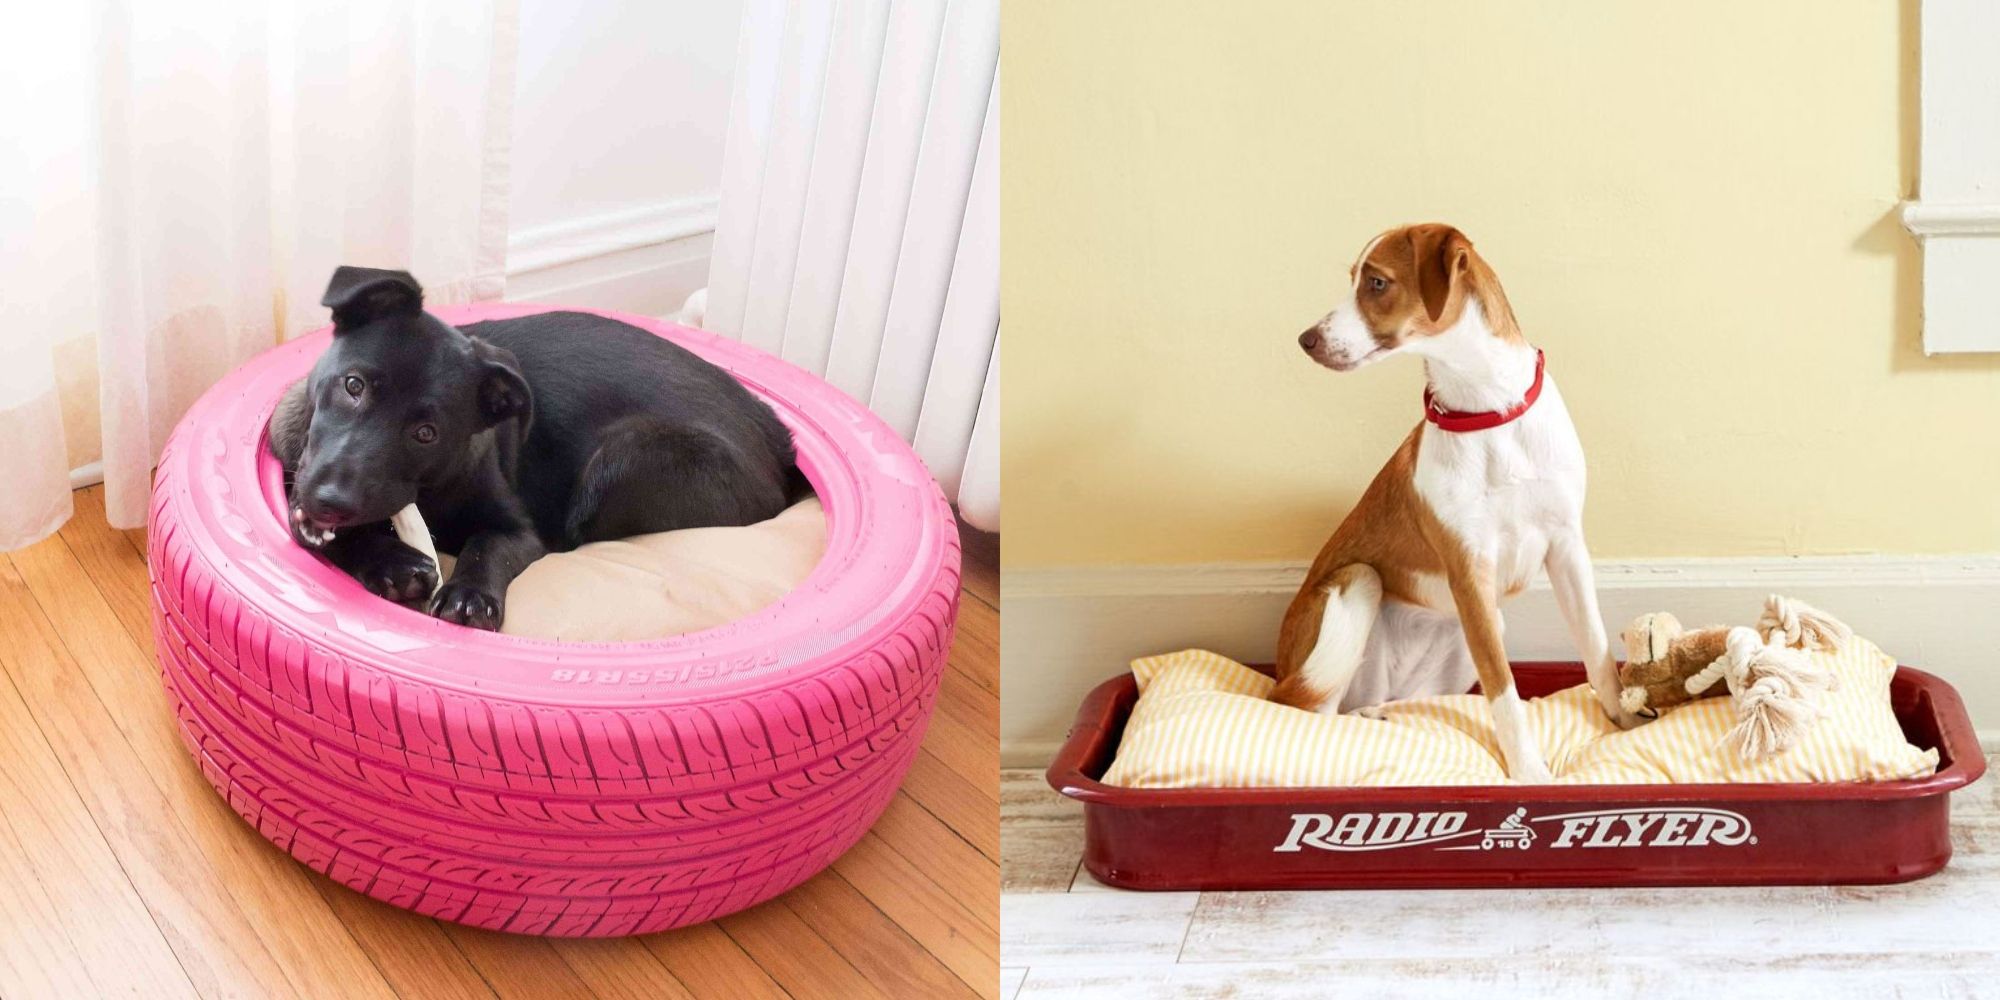 19 Adorable Diy Dog Beds How To Make, King Bed With Doggie Insert